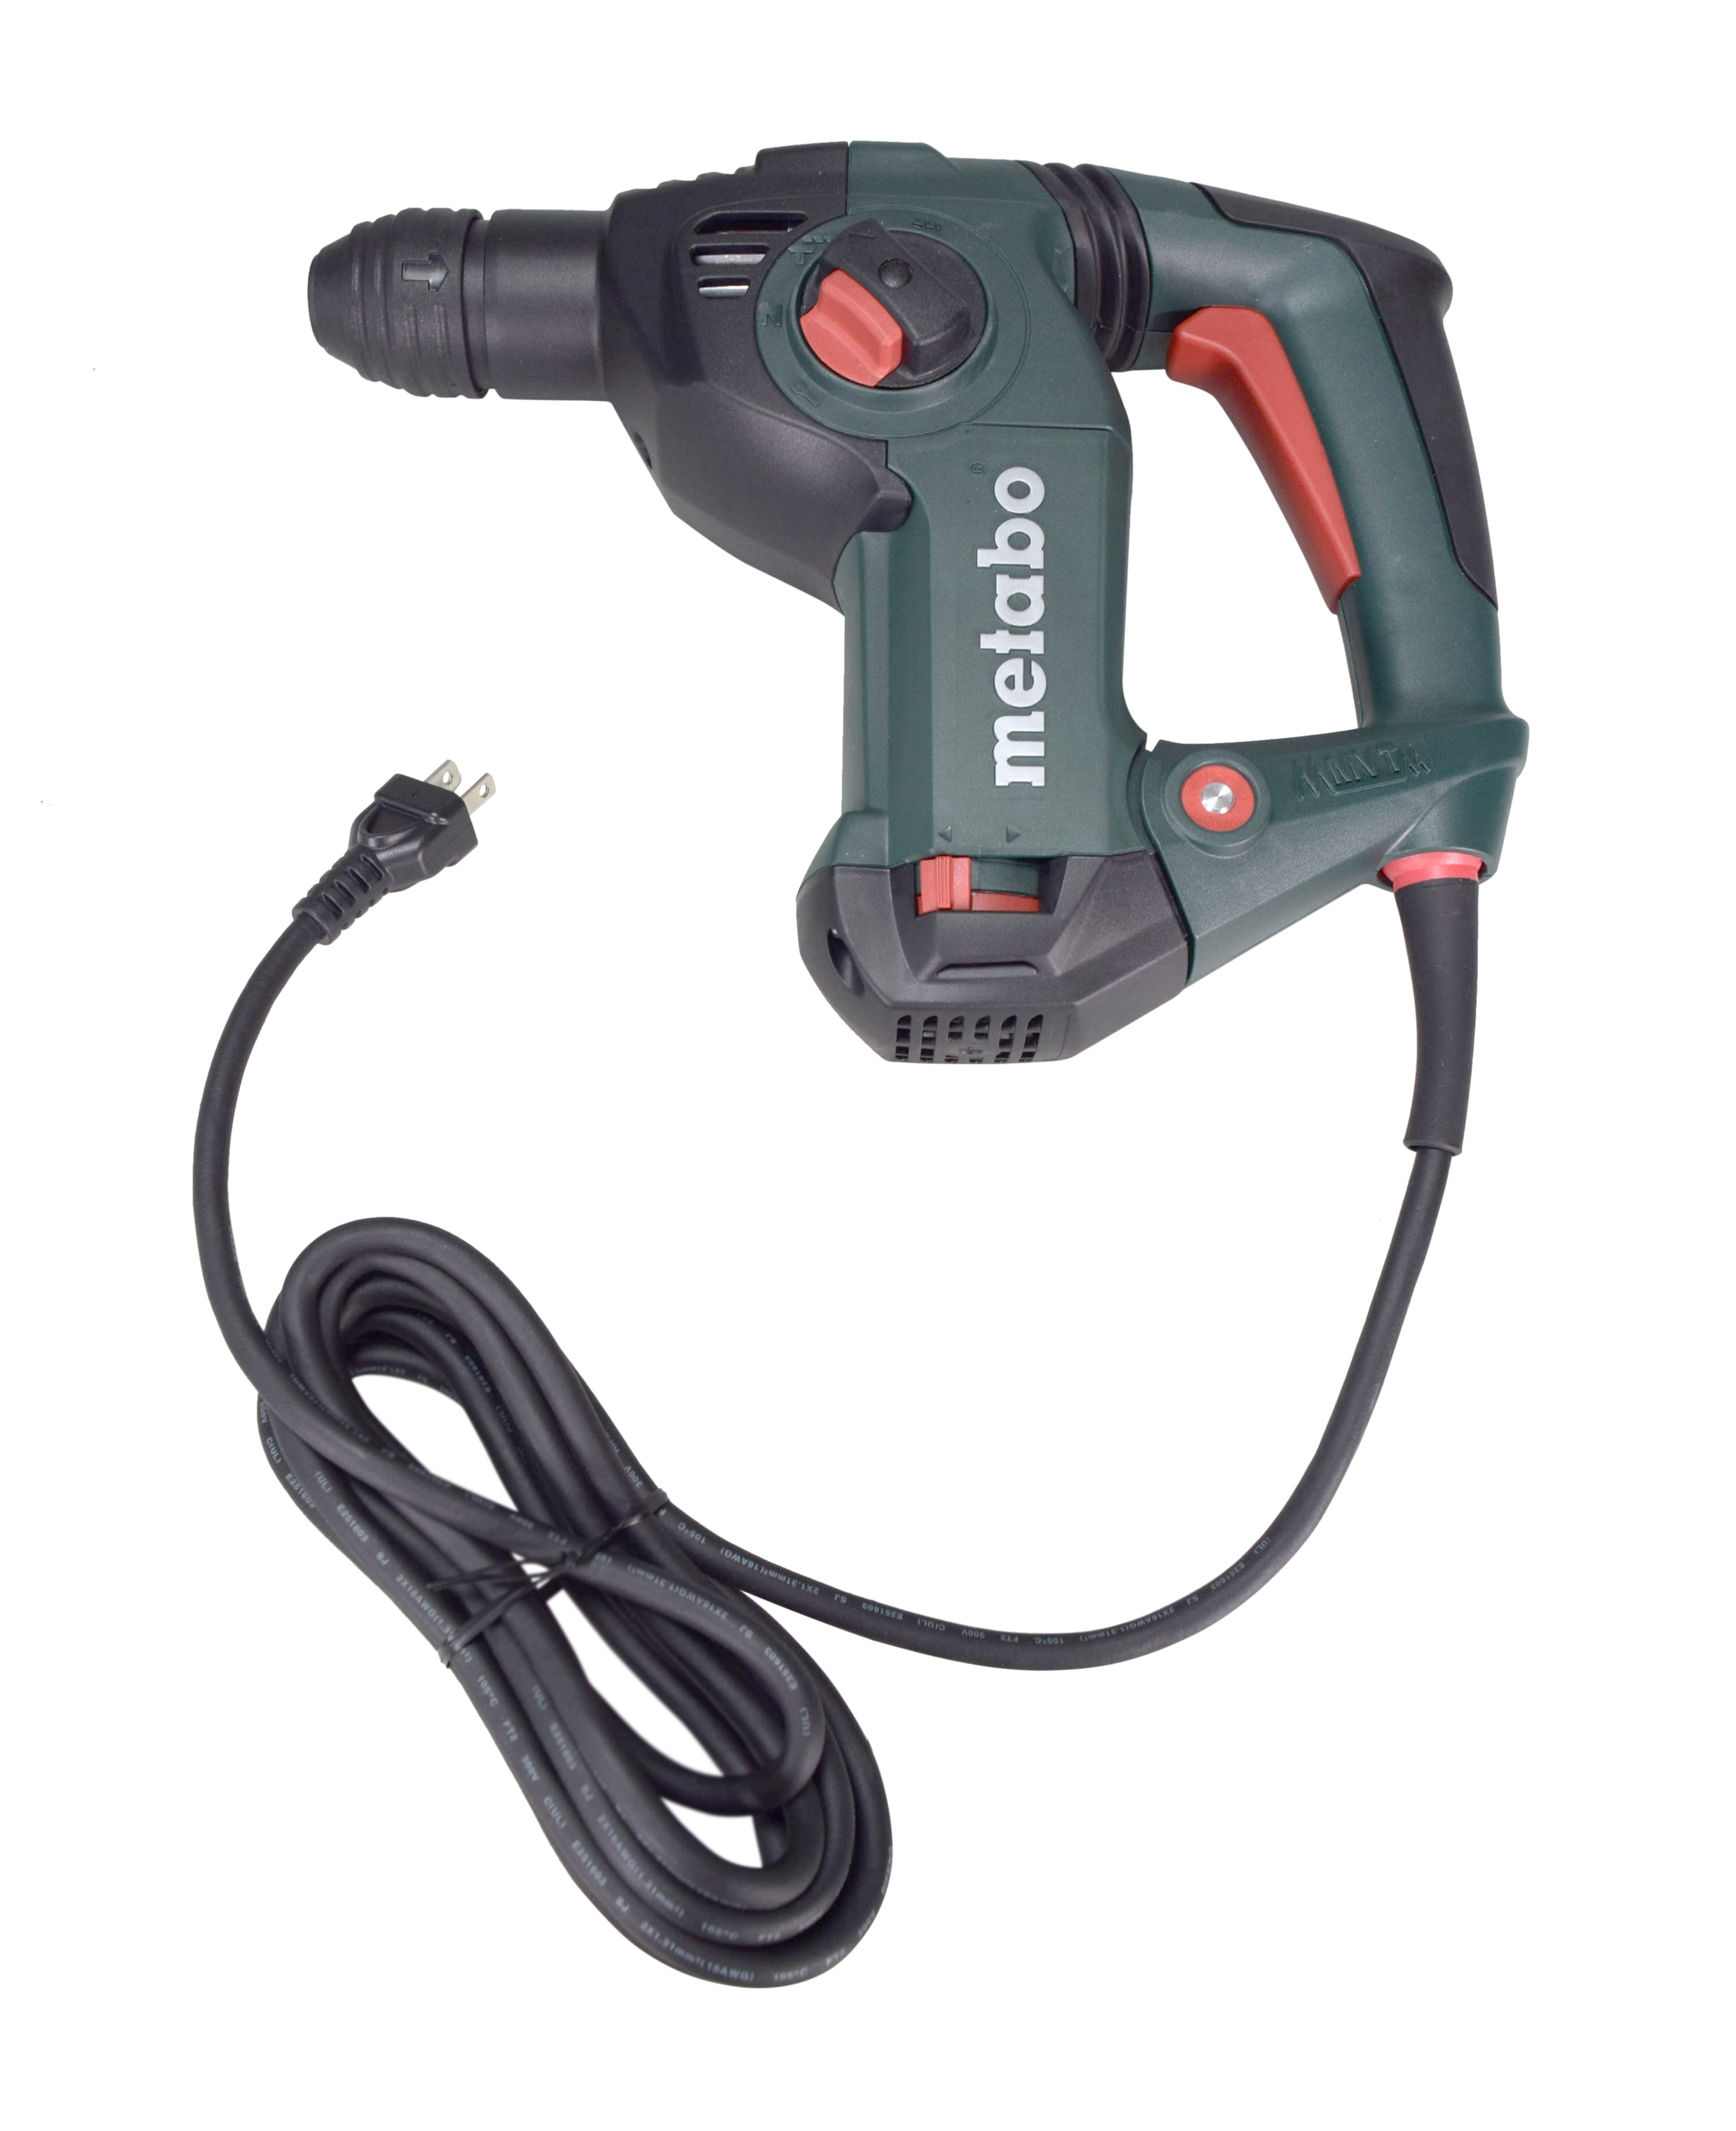 Metabo 600637420 KHE 3250 1 1/8-Inch 800-watt SDS Plus Rotary Hammer with Rotostop